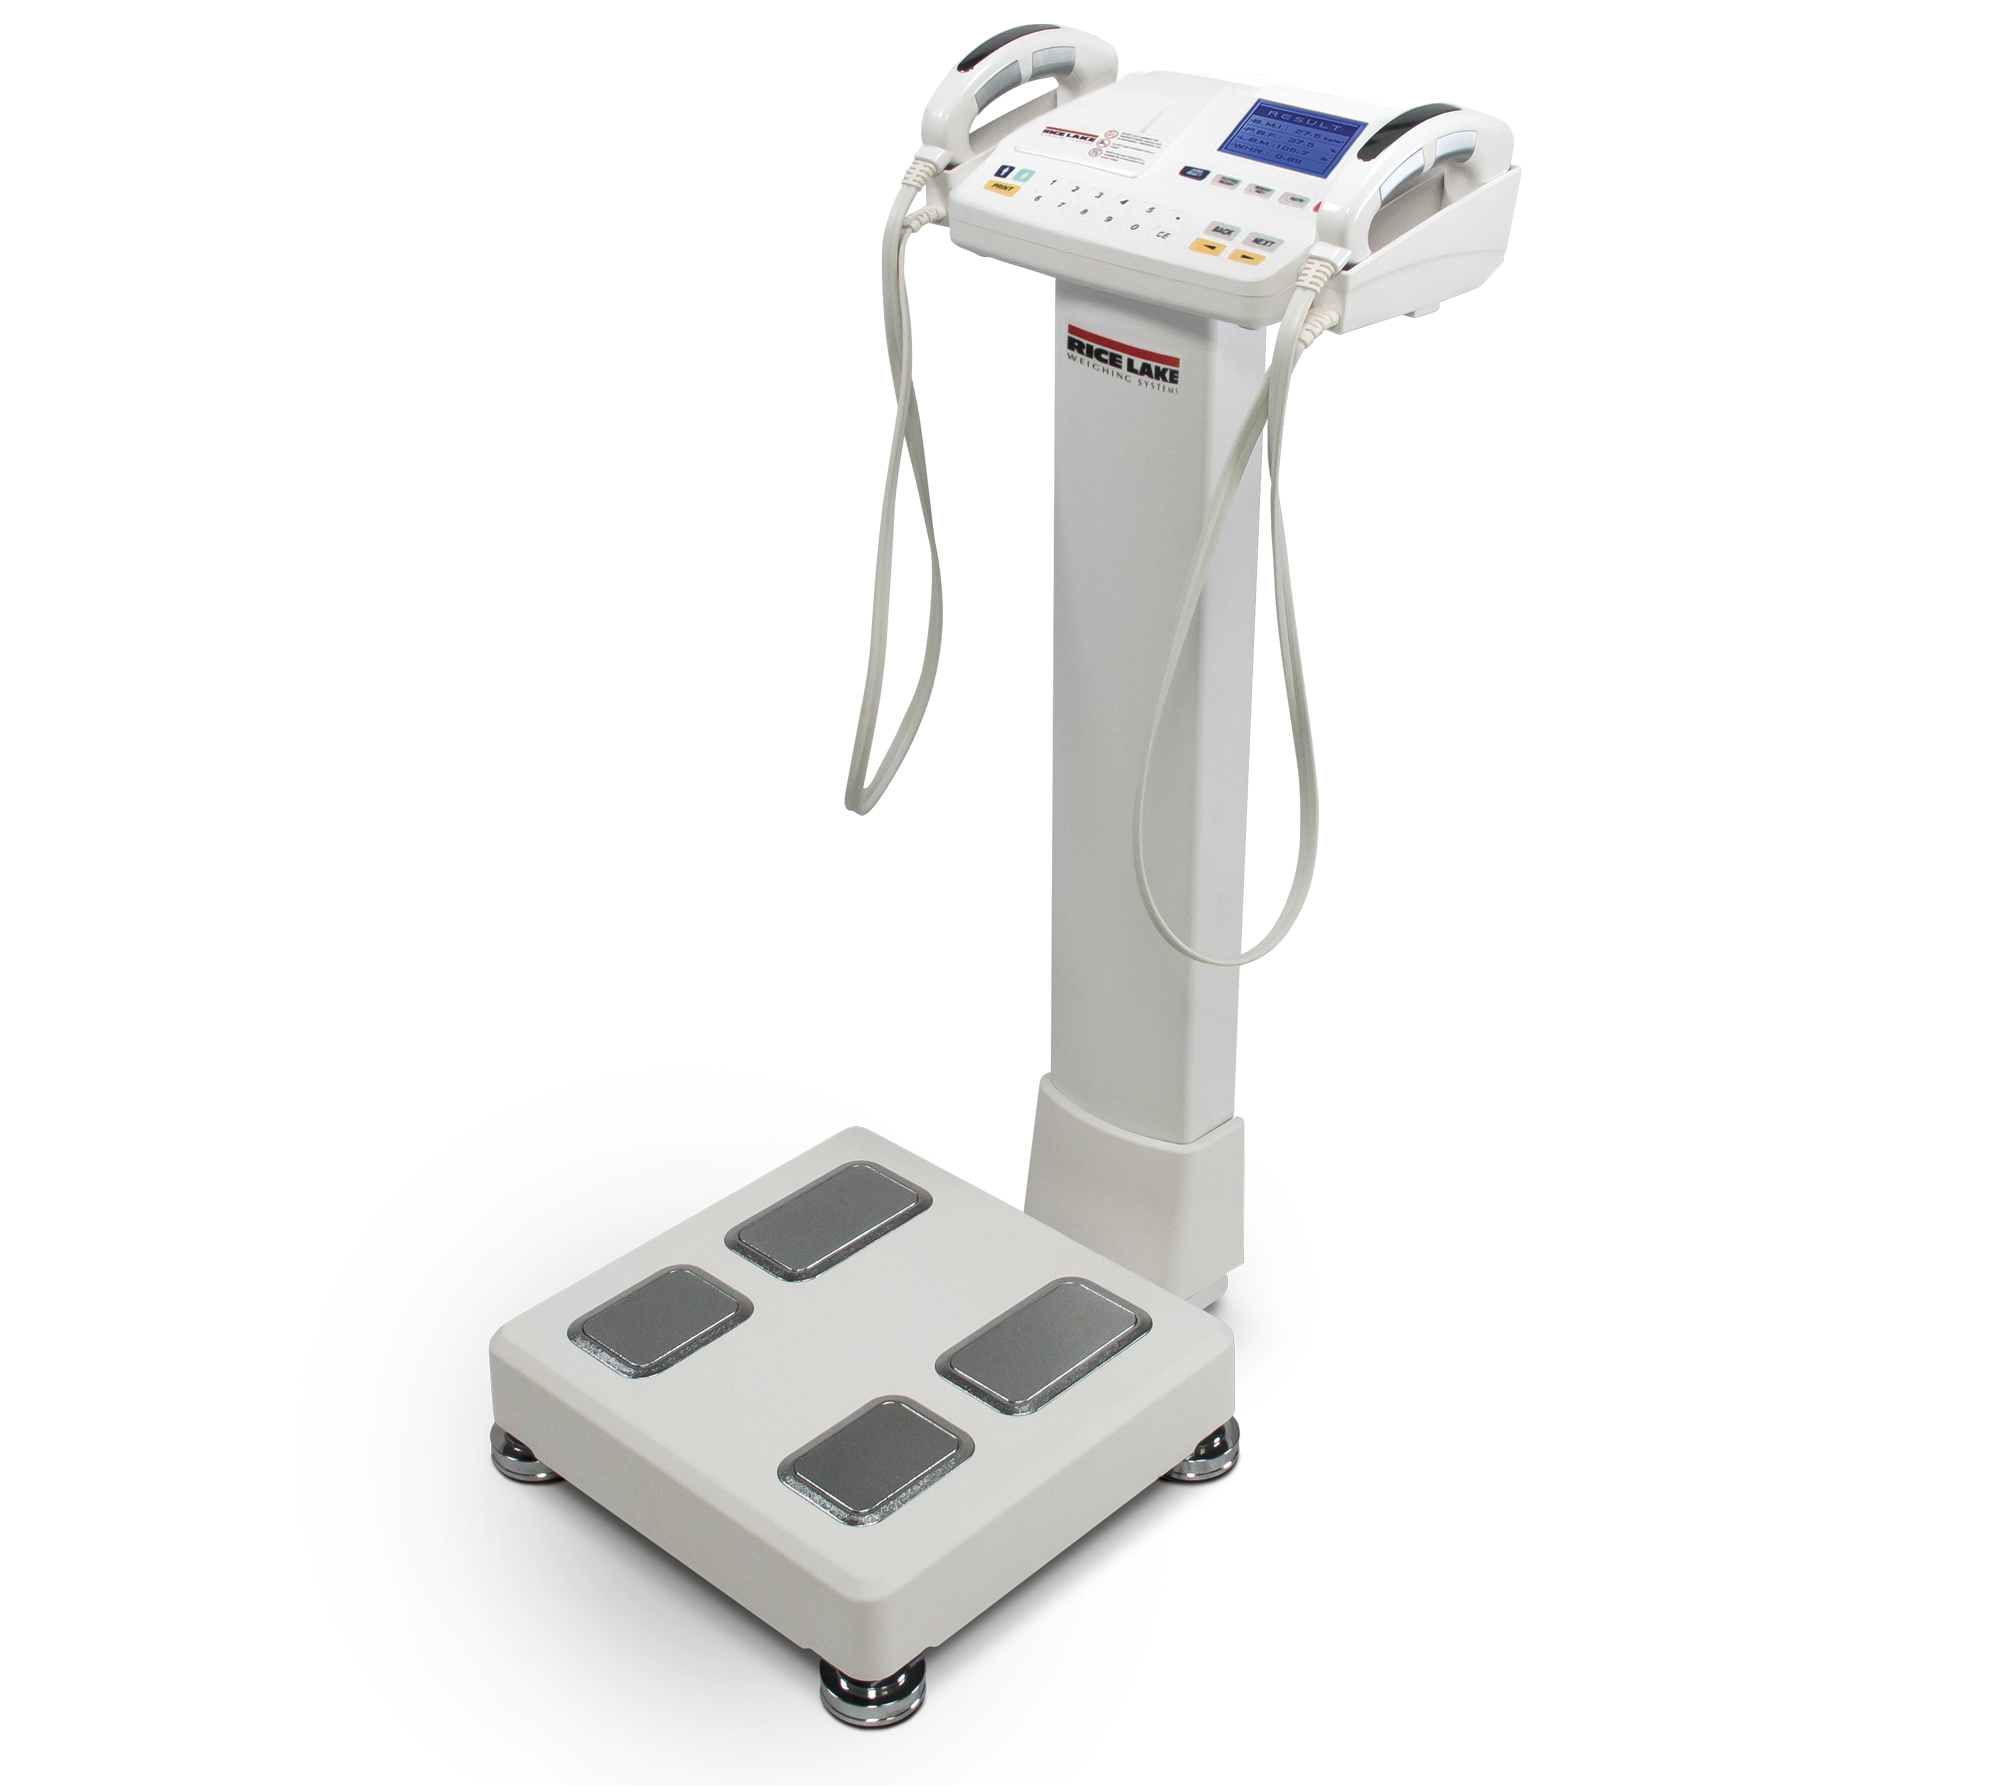 https://products.carolinascales.com/Asset/D1000-3-Full-Body-Multi-Frequency-Segmental-Analyzer-Scales.png